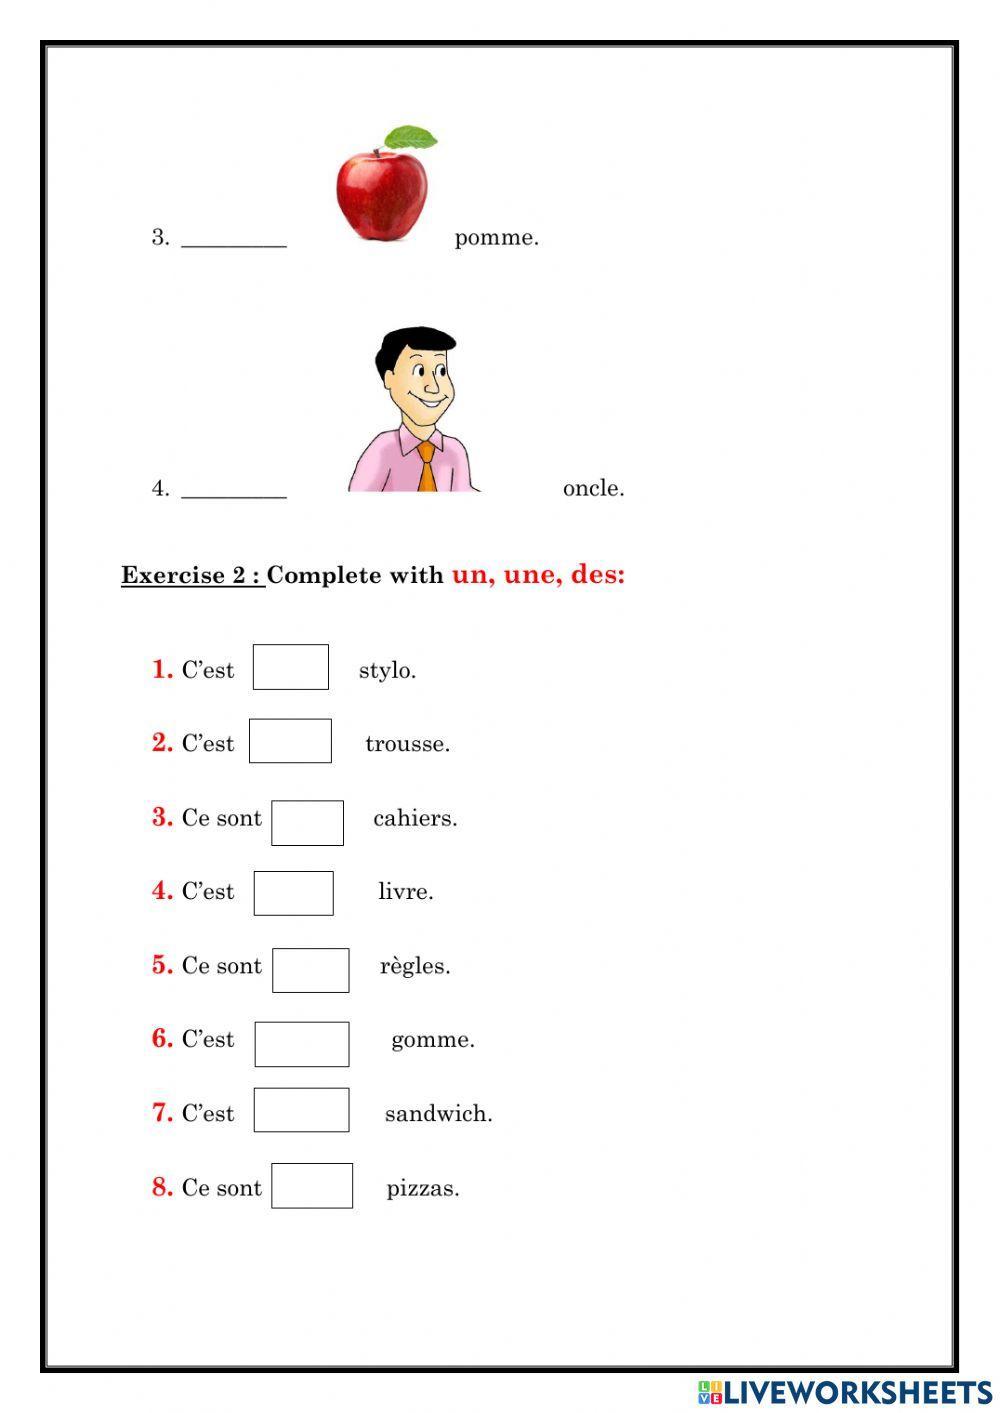 Practice exercises for French articles